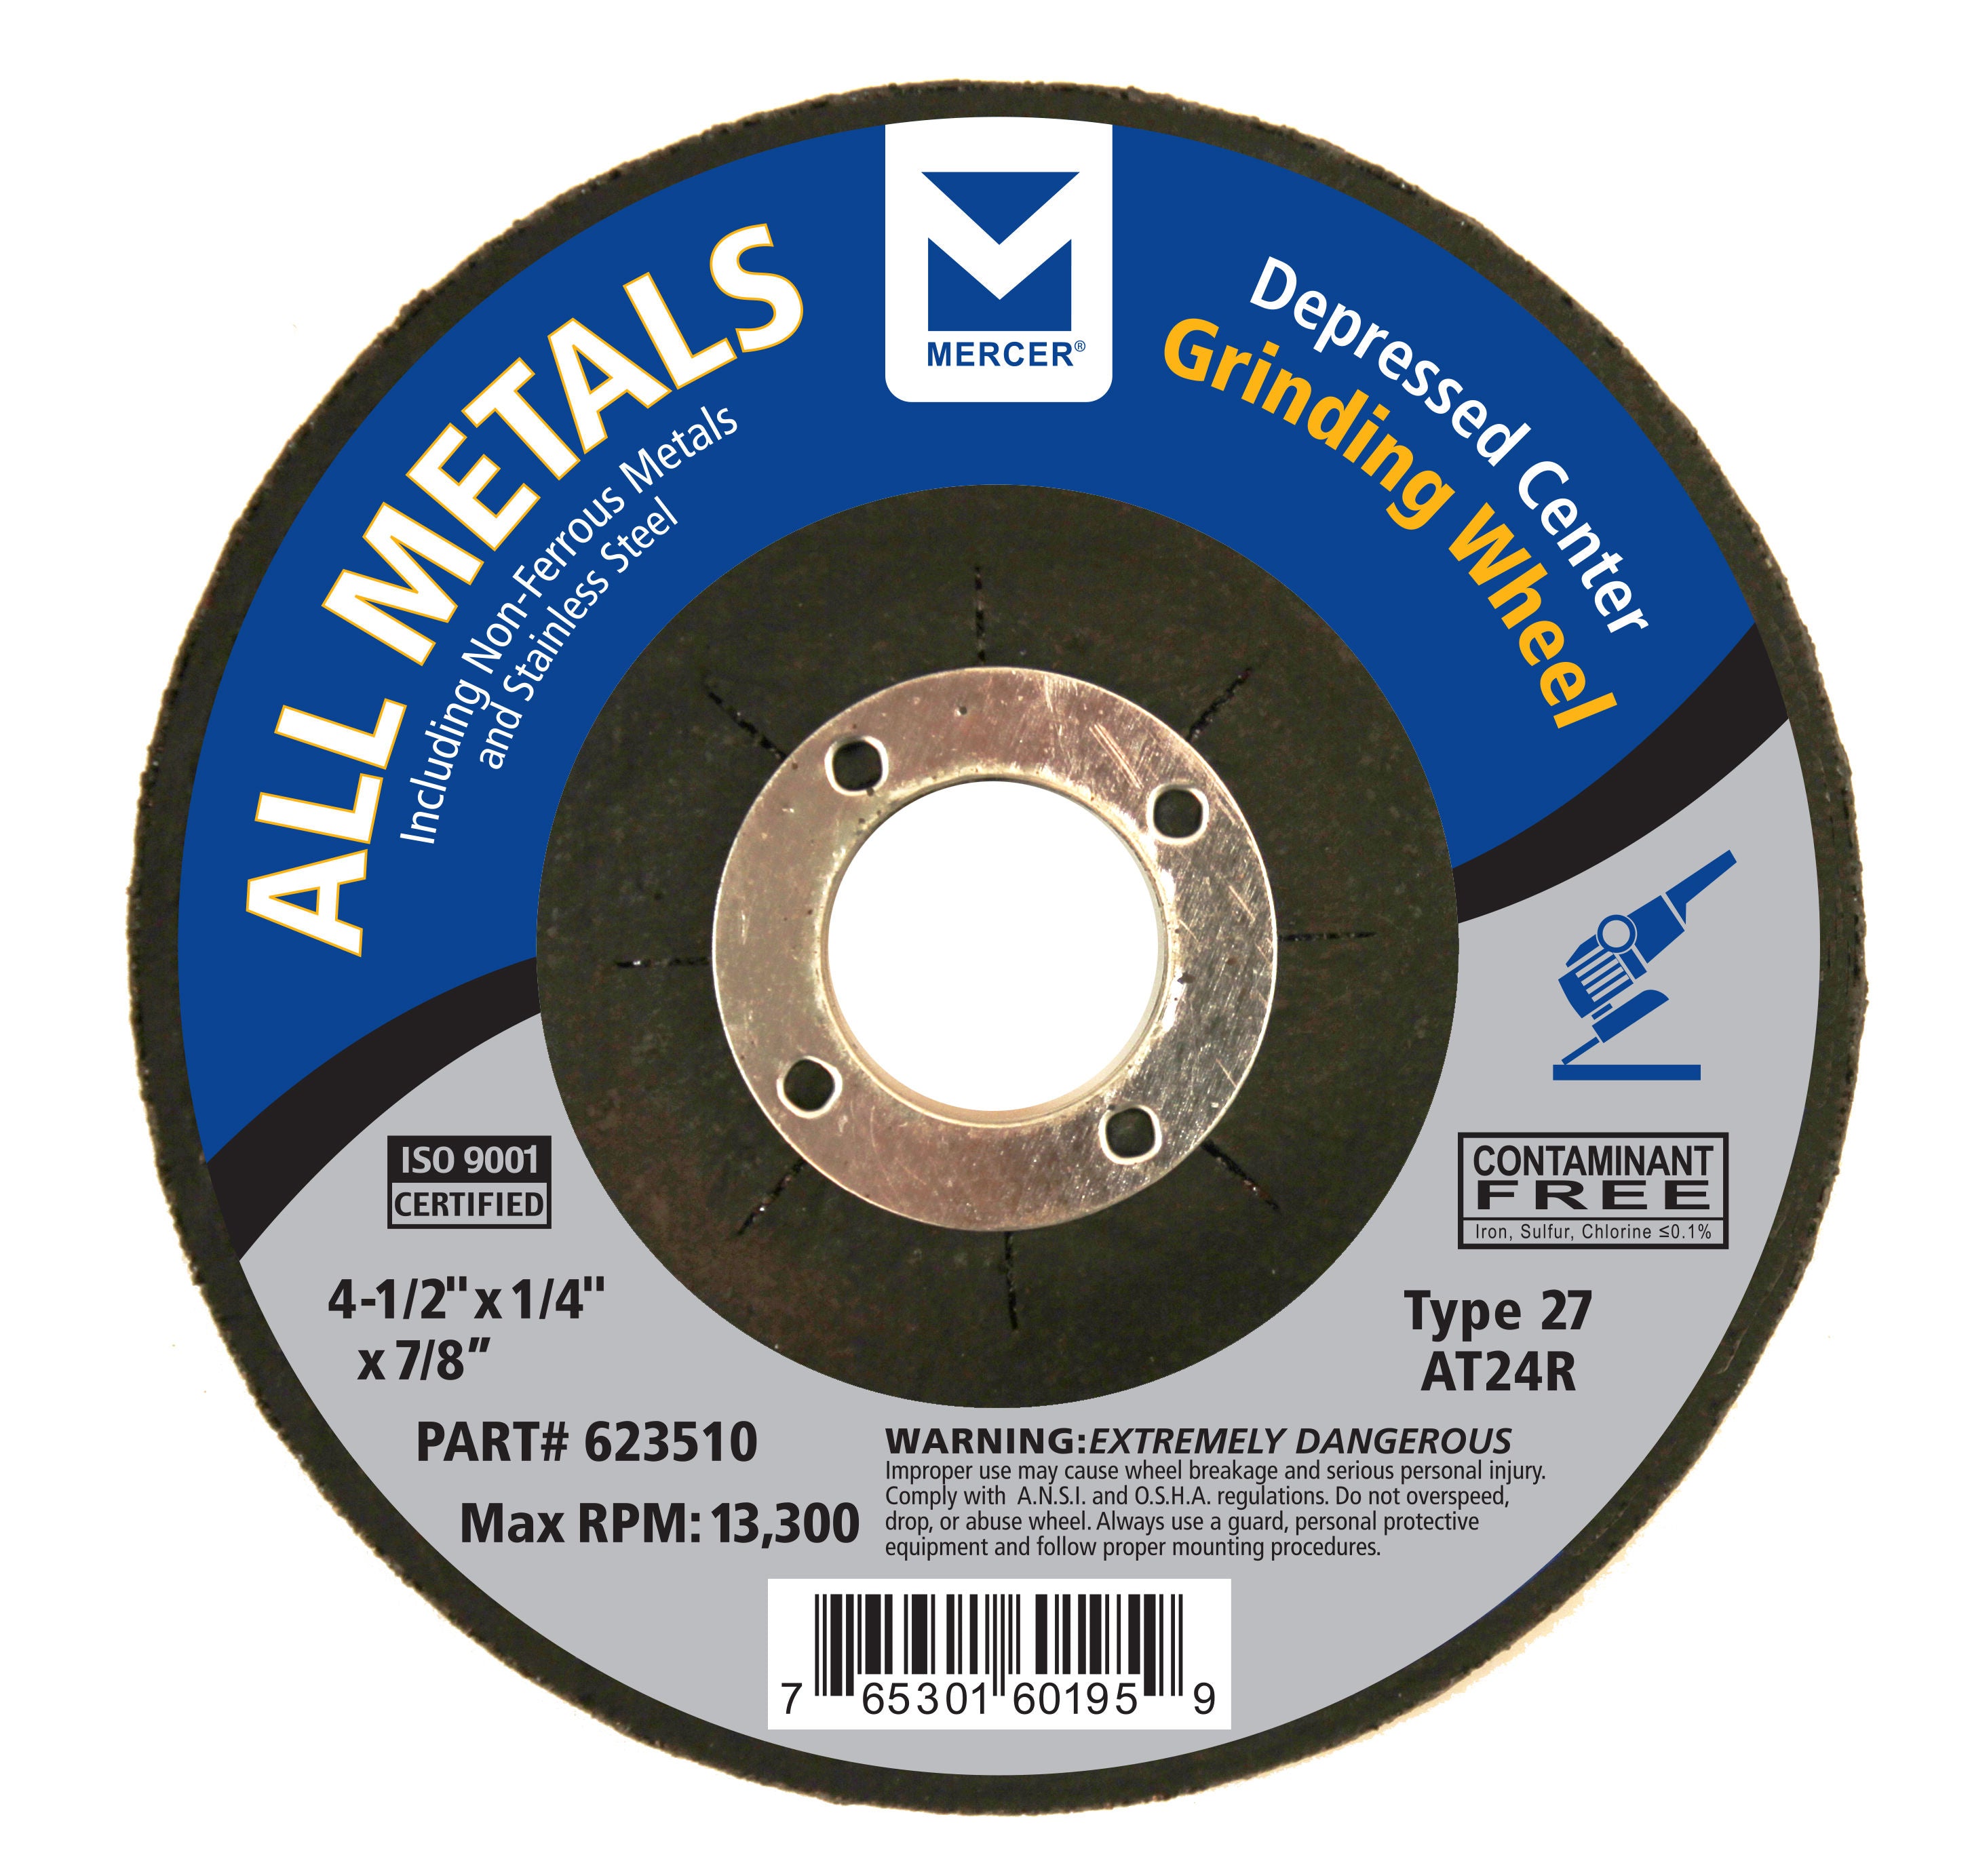 4-1/2"x1/4"x7/8" AT24R T27 Depressed Center Grinding Wheel for Stainless Steel - Single Grit